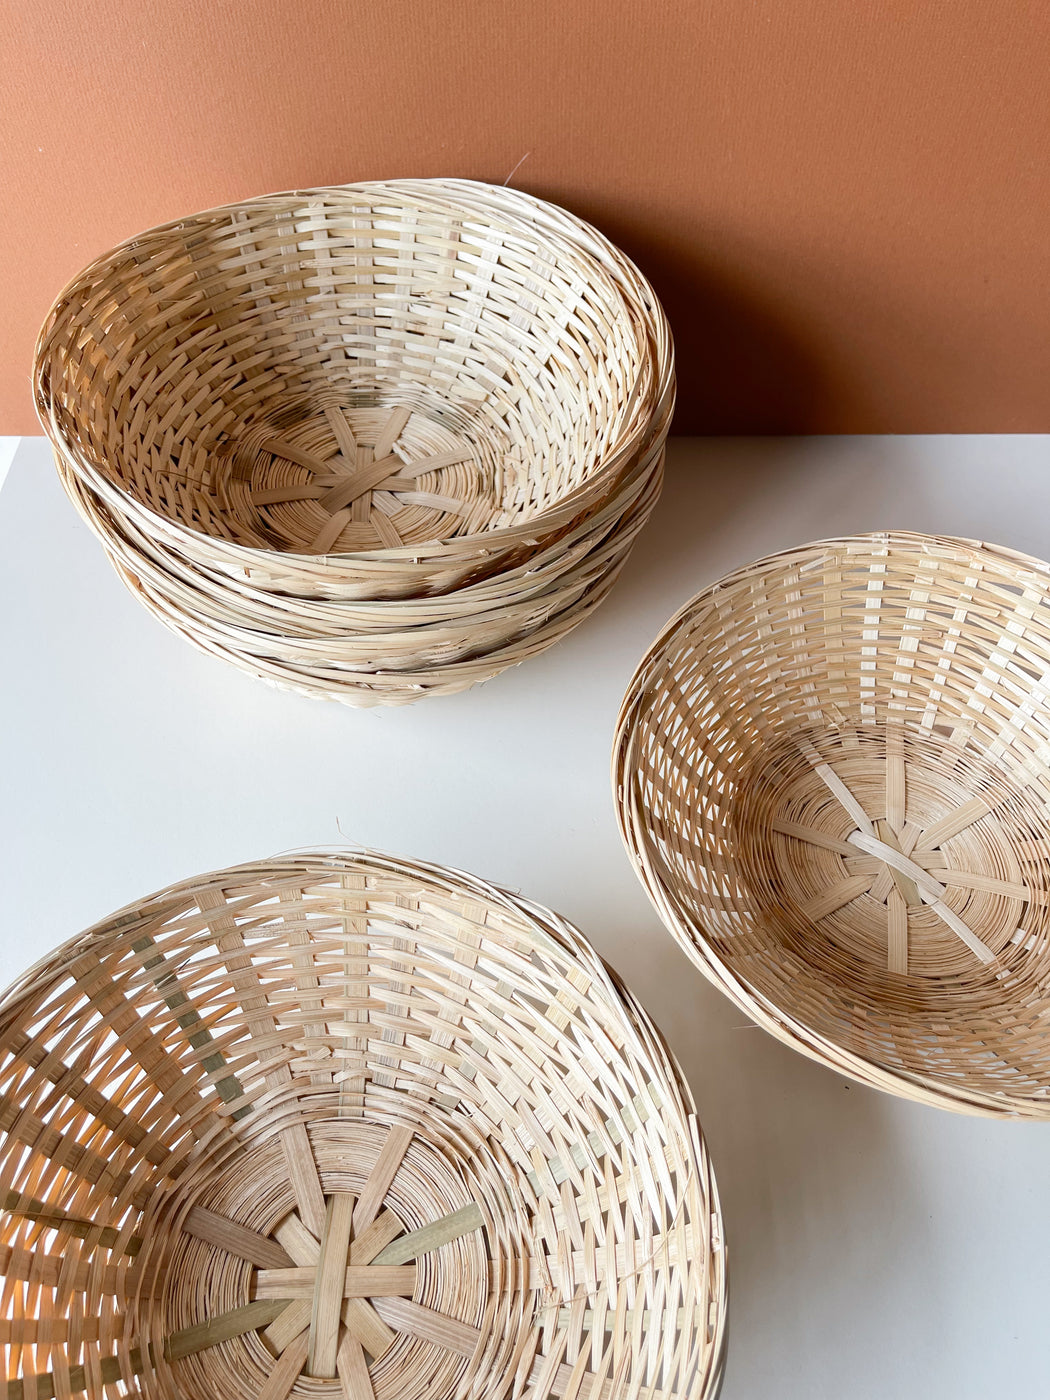 Woven Reed Baskets